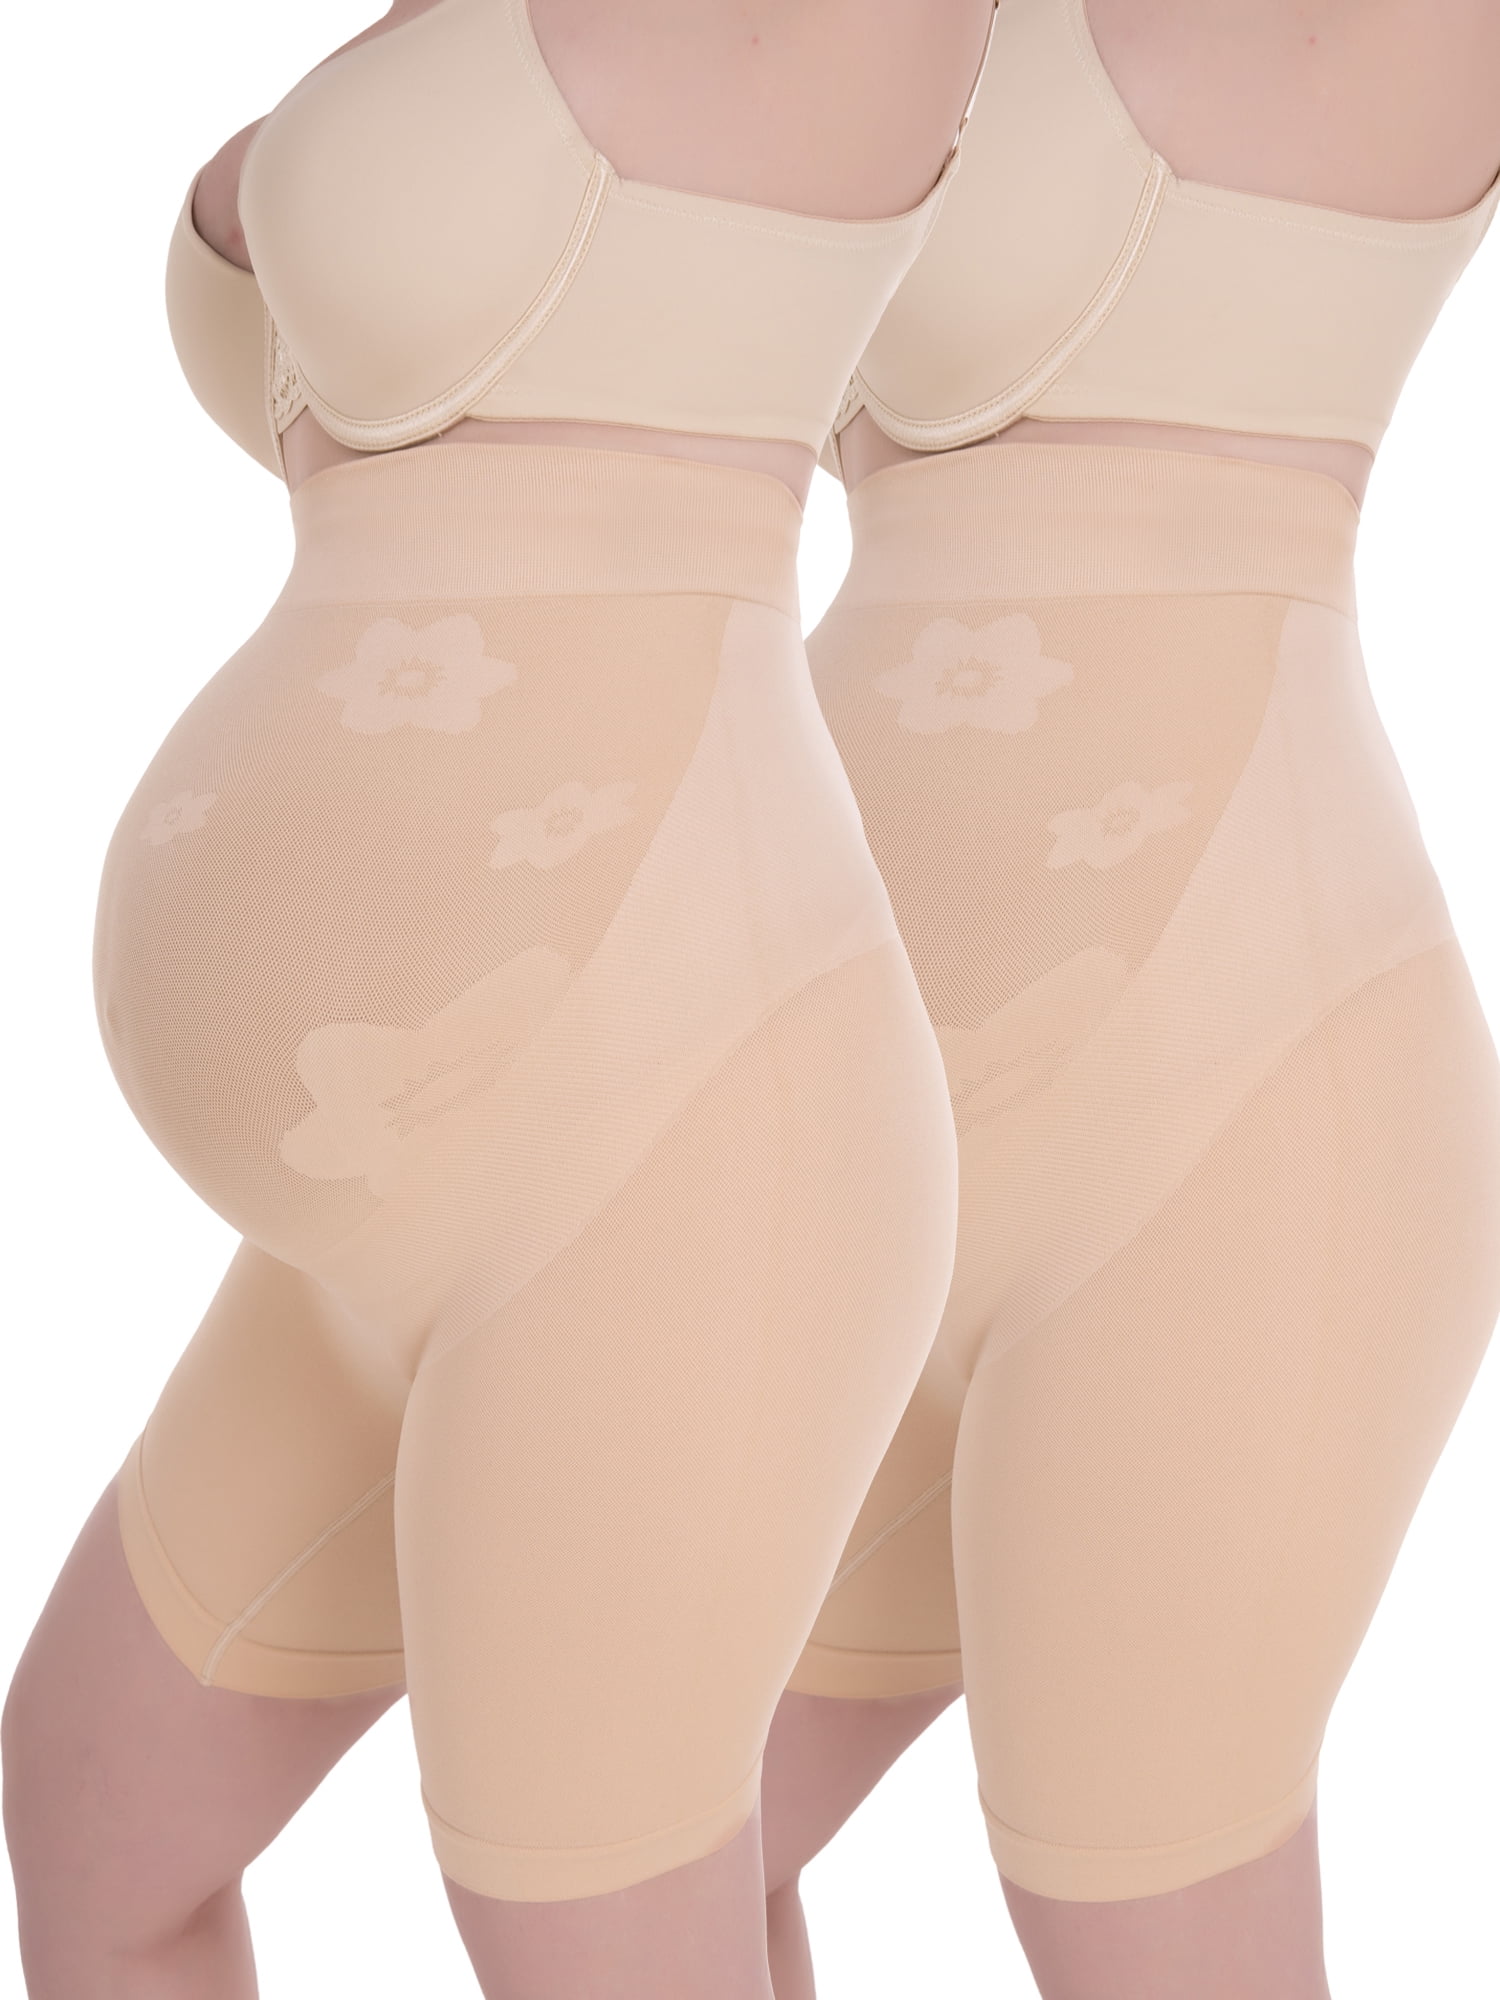 O.C.E Baby Womens Soft and Seamless Pregnancy Boyshorts Maternity Shapewear Belly Support 2 Pack 